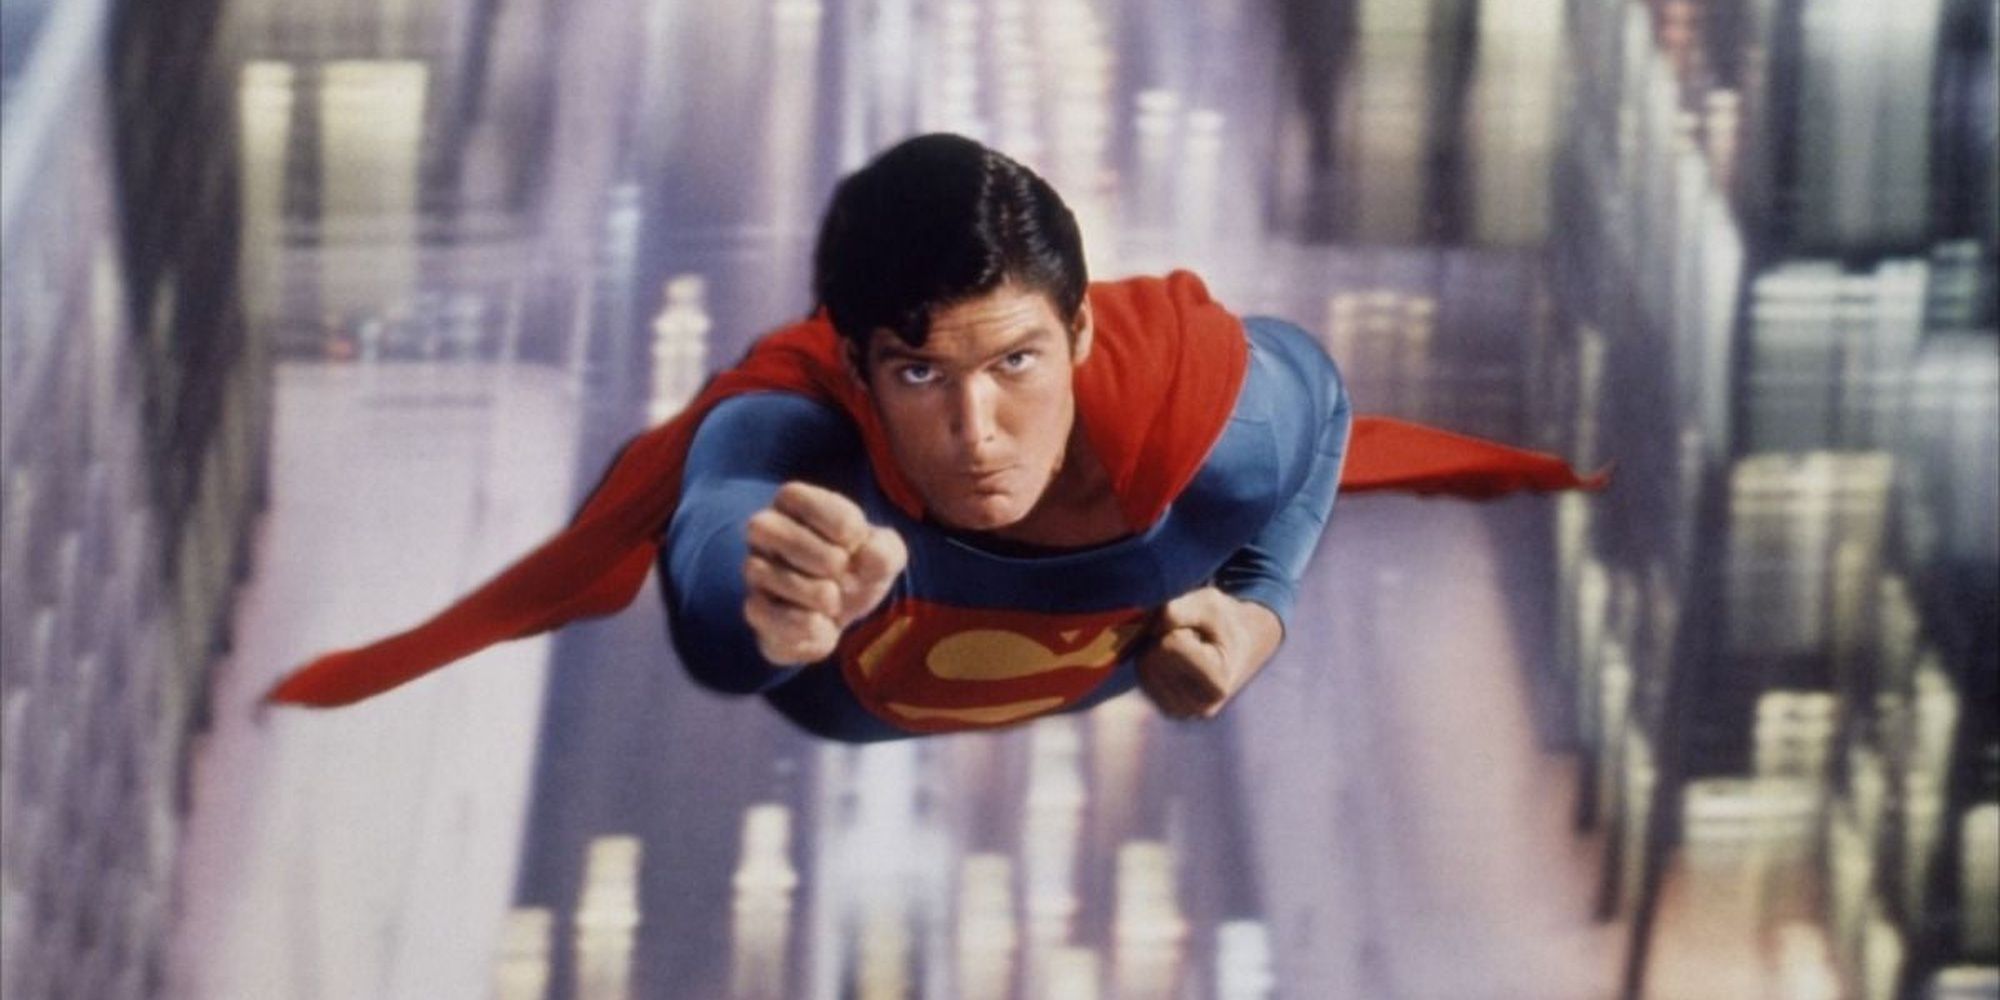 Christopher Reeve soaring through a city in Superman